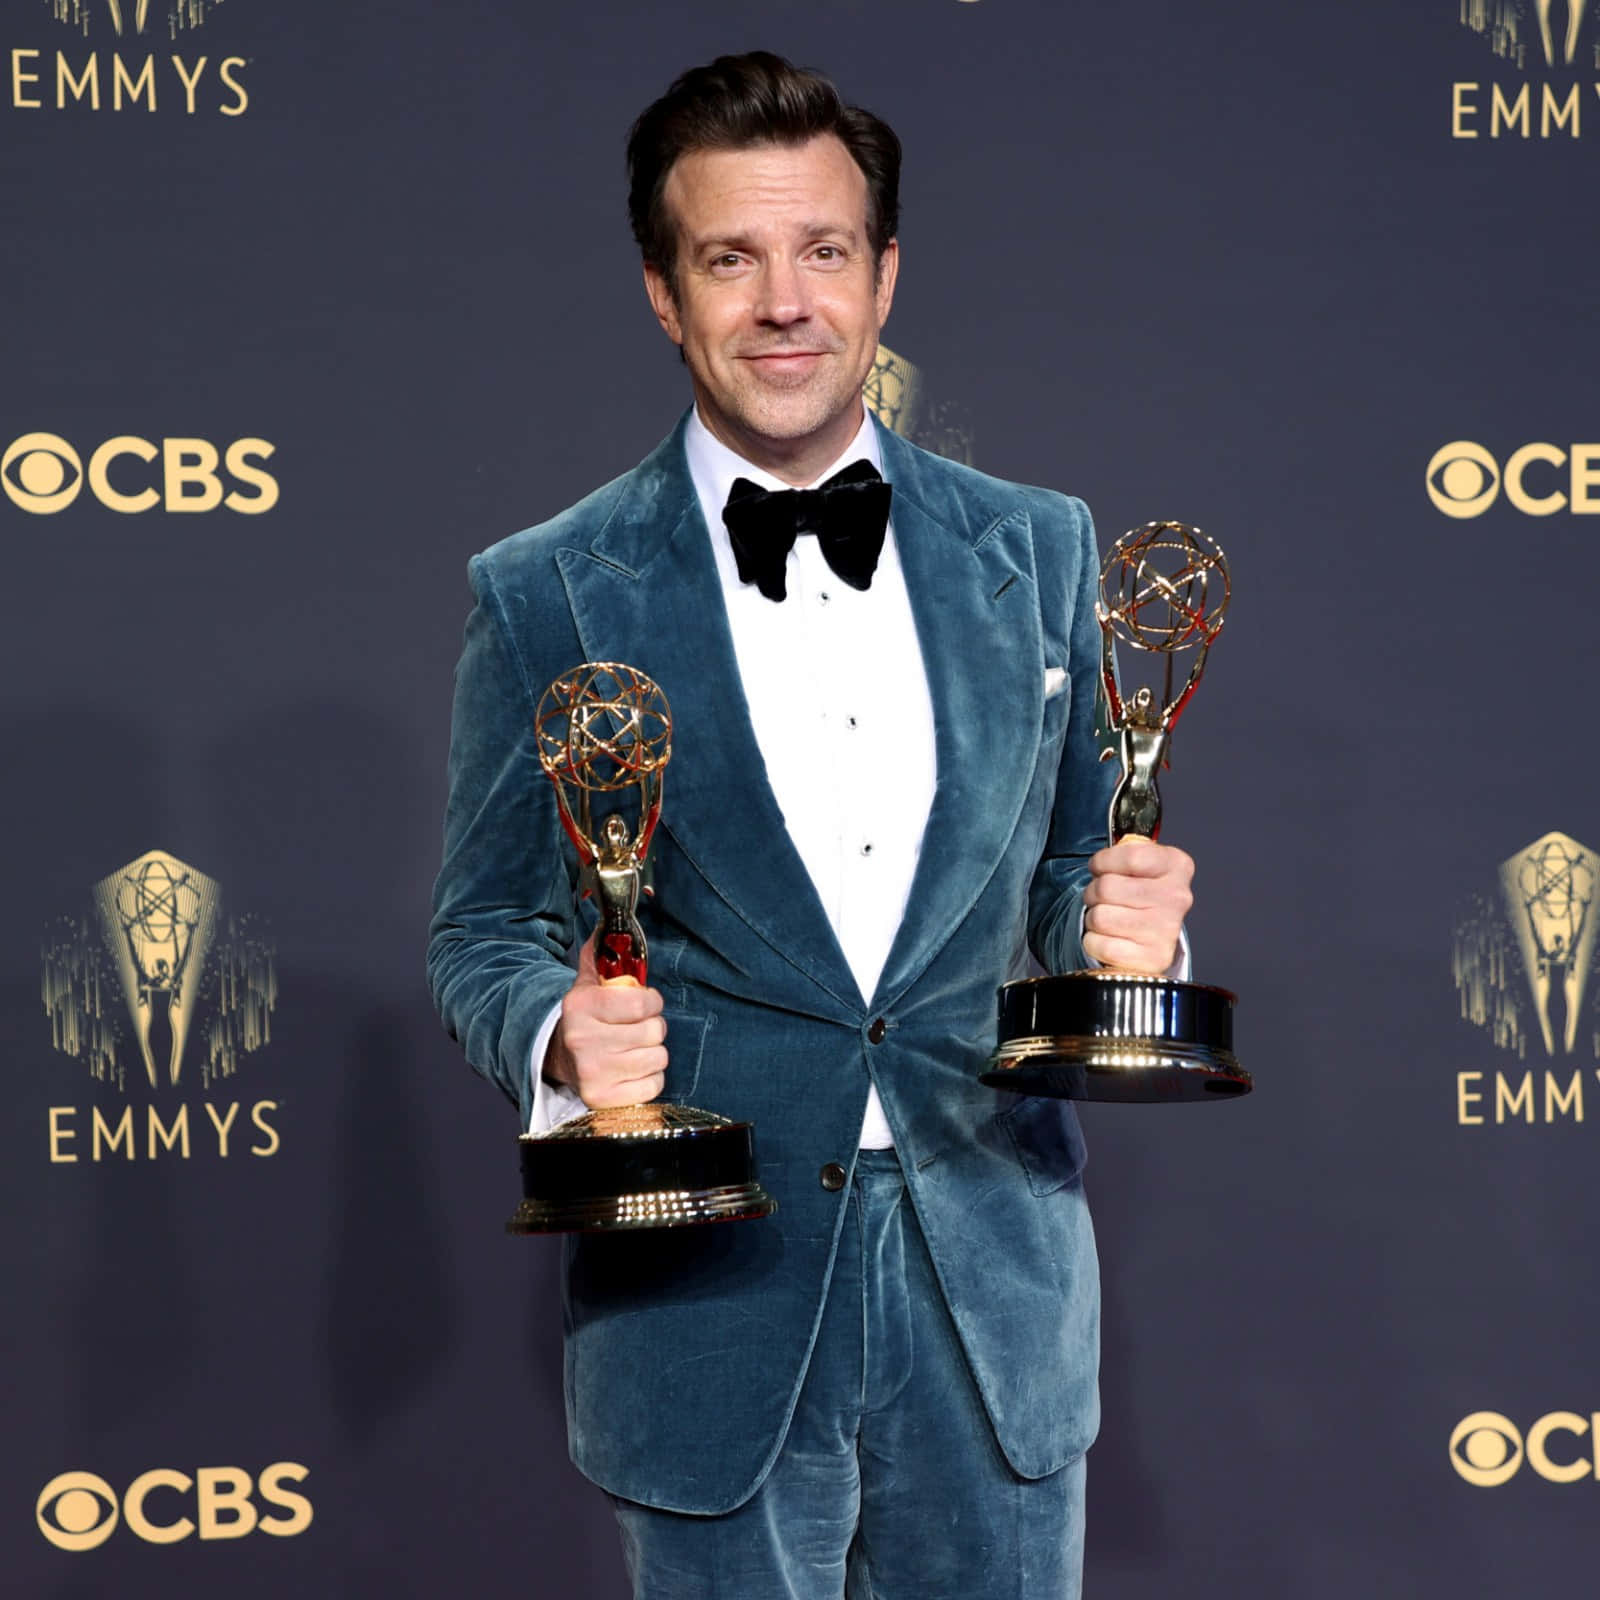 Jasonsudeikis Is Not A Relevant Sentence To Translate In The Context Of Computer Or Mobile Wallpaper. Would You Like Me To Translate A Different Sentence Or Provide Information About Computer Or Mobile Wallpaper In Spanish? Fondo de pantalla